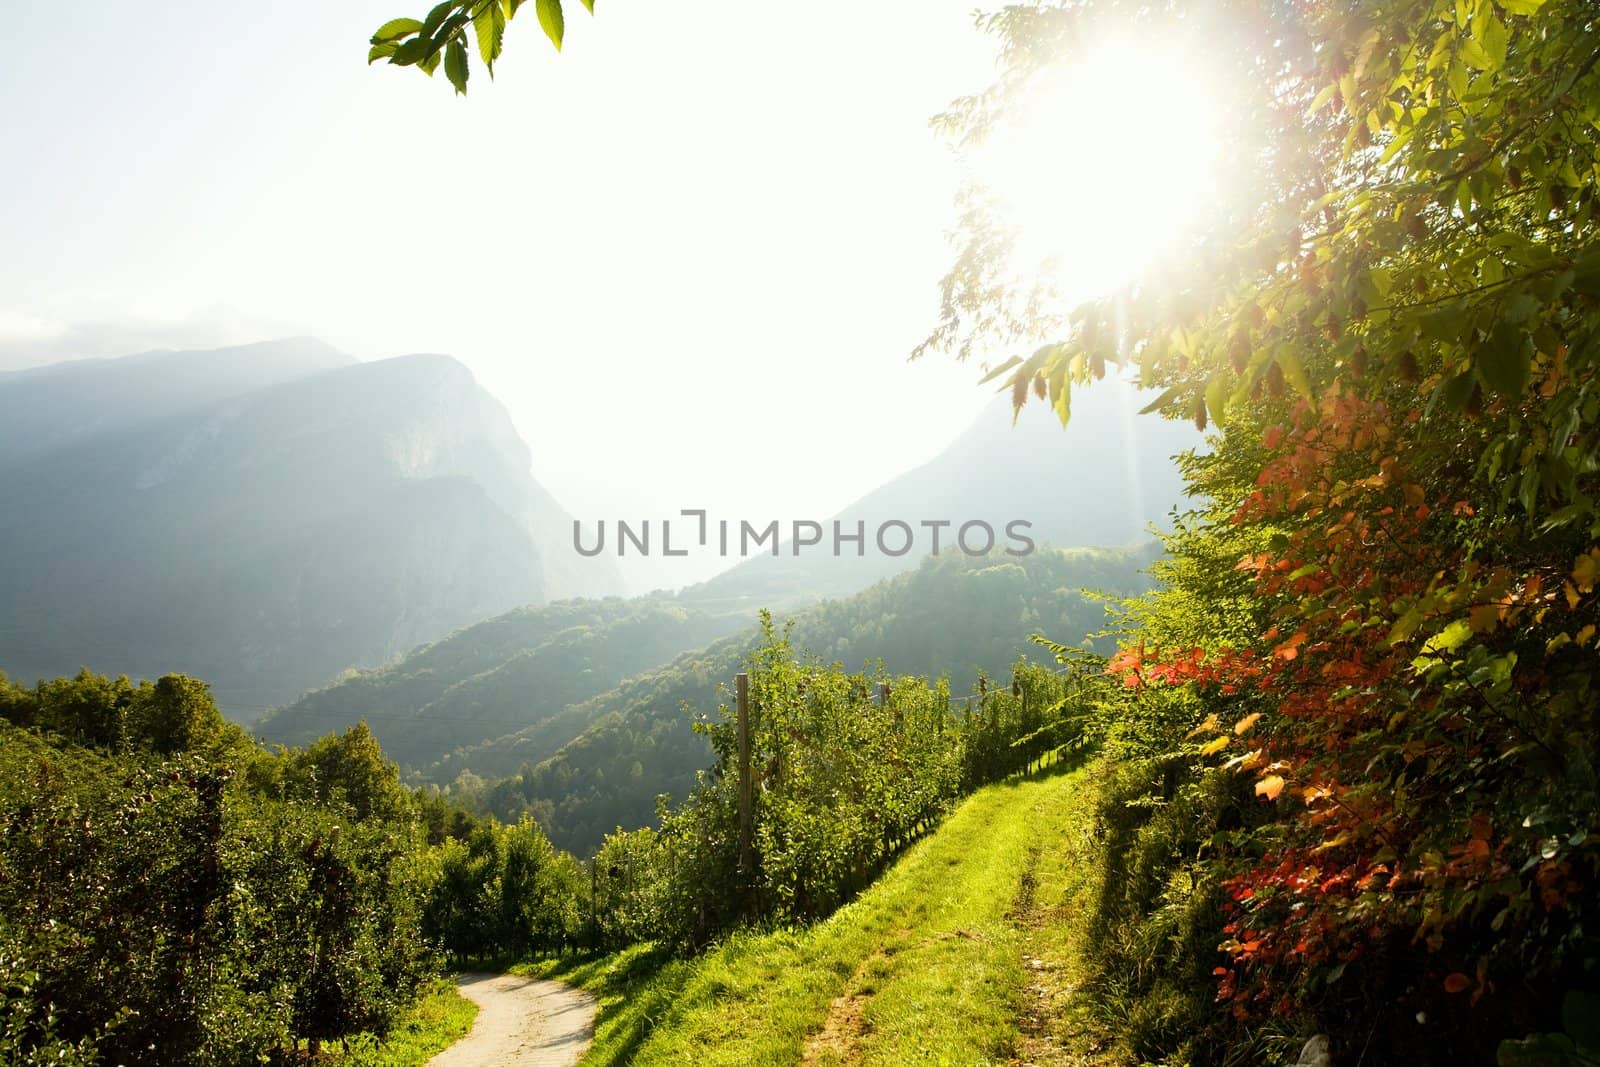 An image of fresh green vine in sunrays